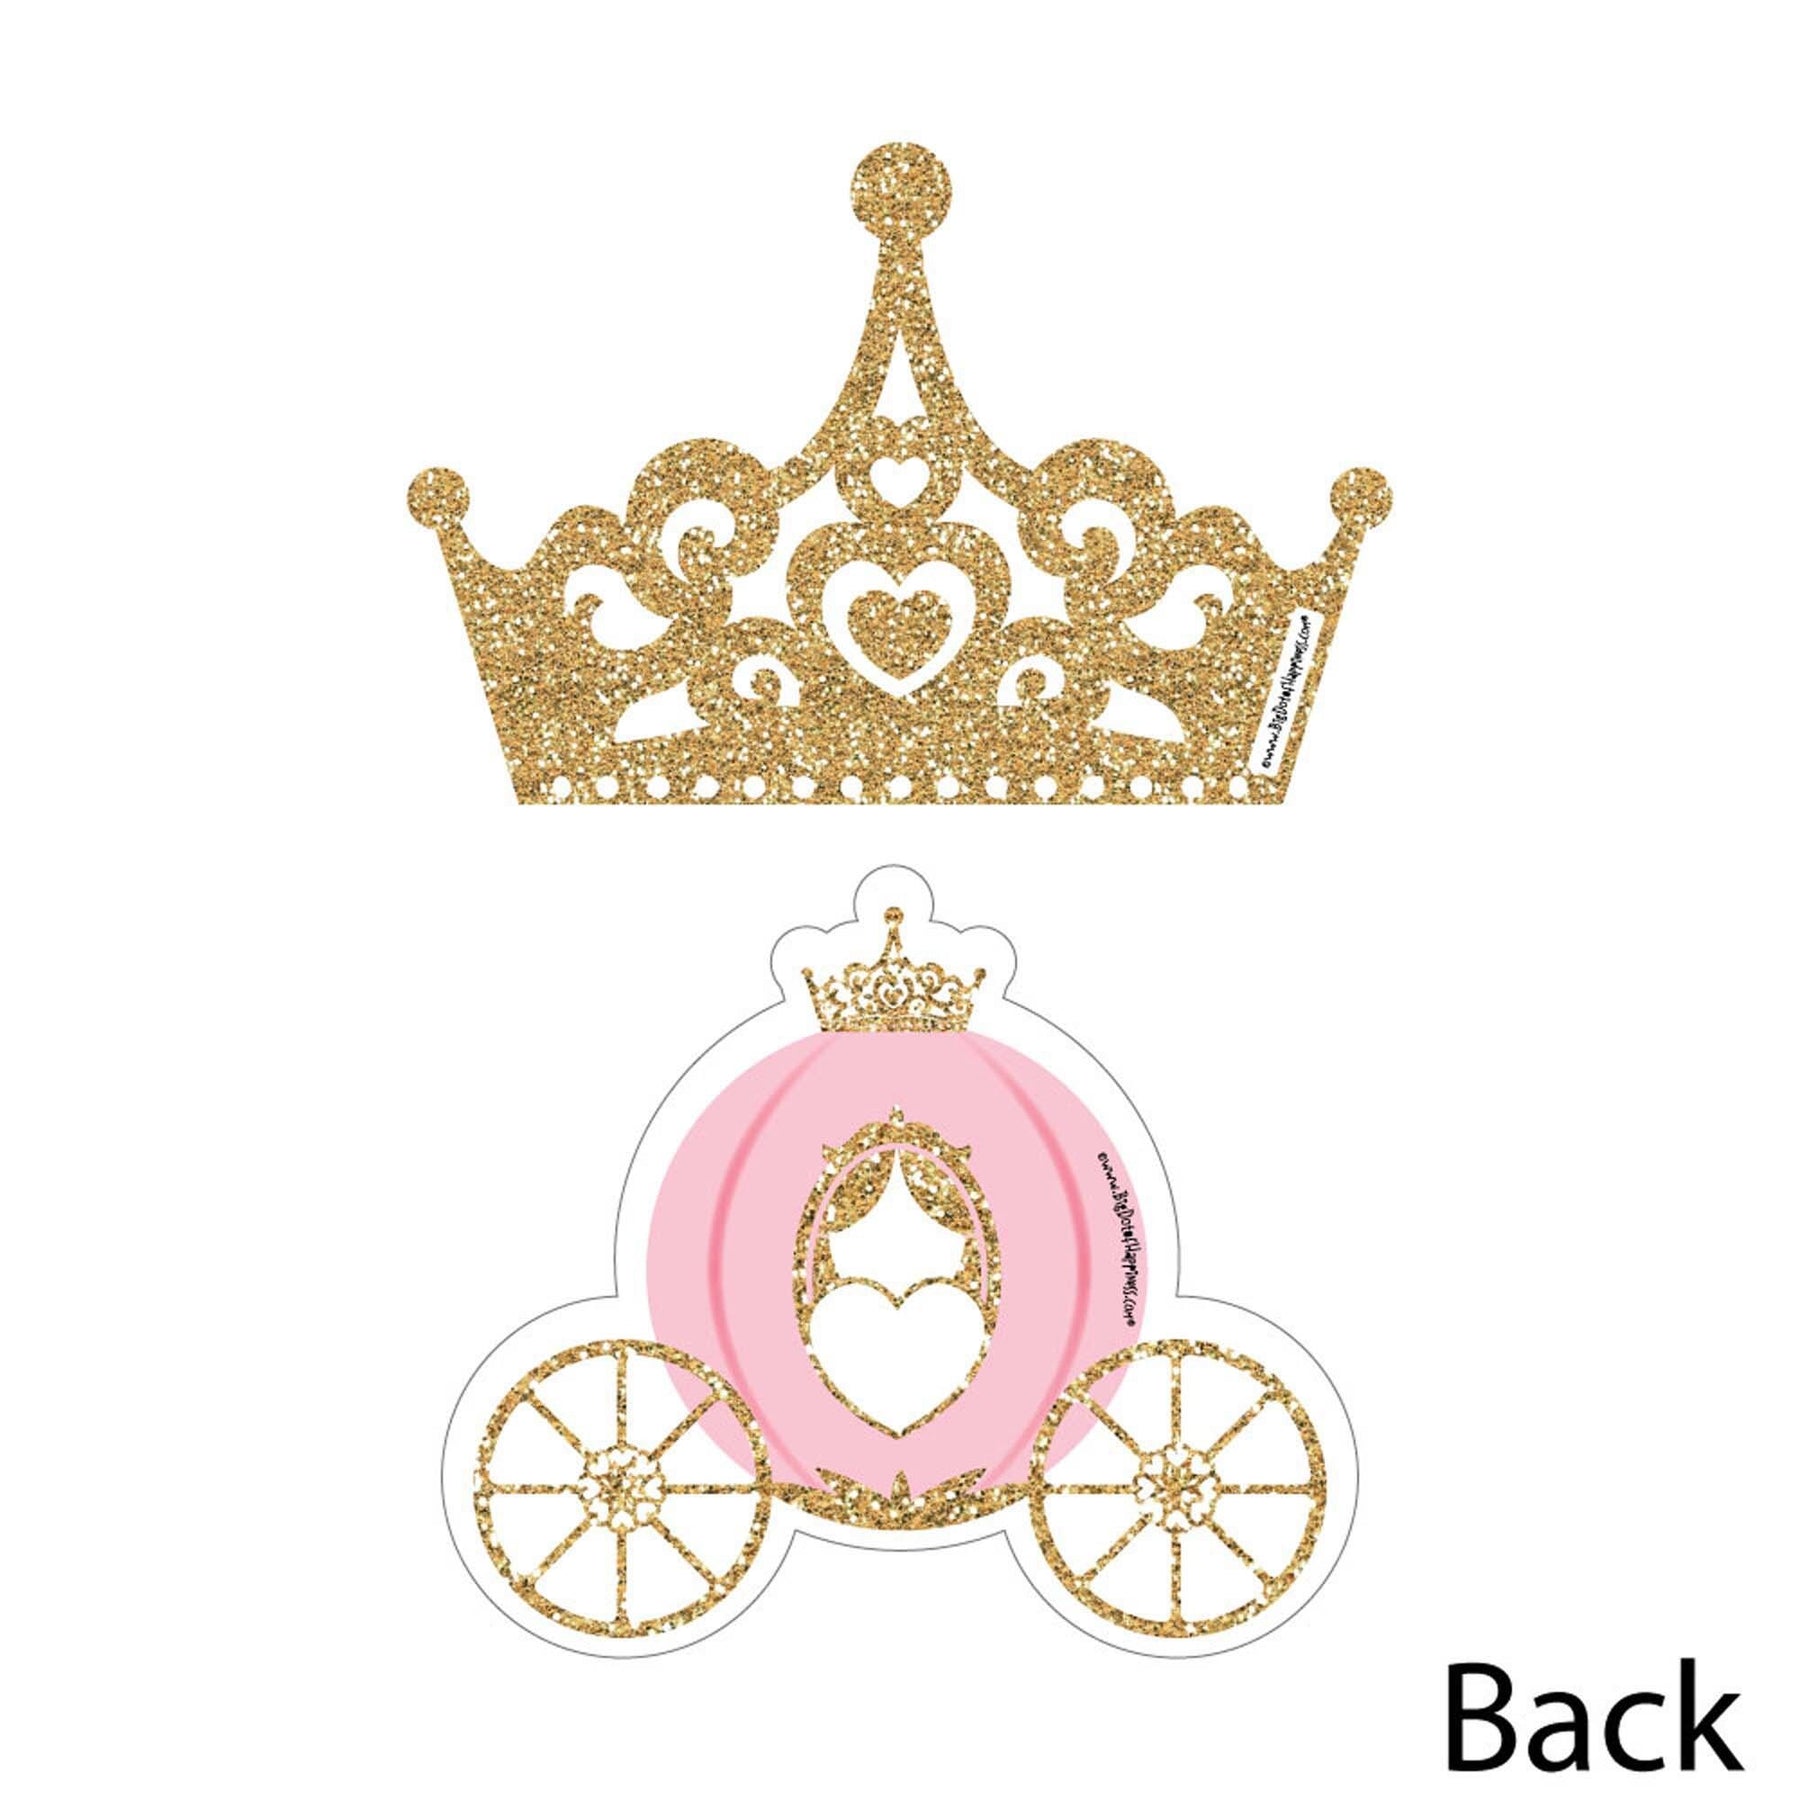 Little Princess Crown - Pink and Gold Princess Baby Shower or Birthday  Party Circle Sticker Labels - 24 Count